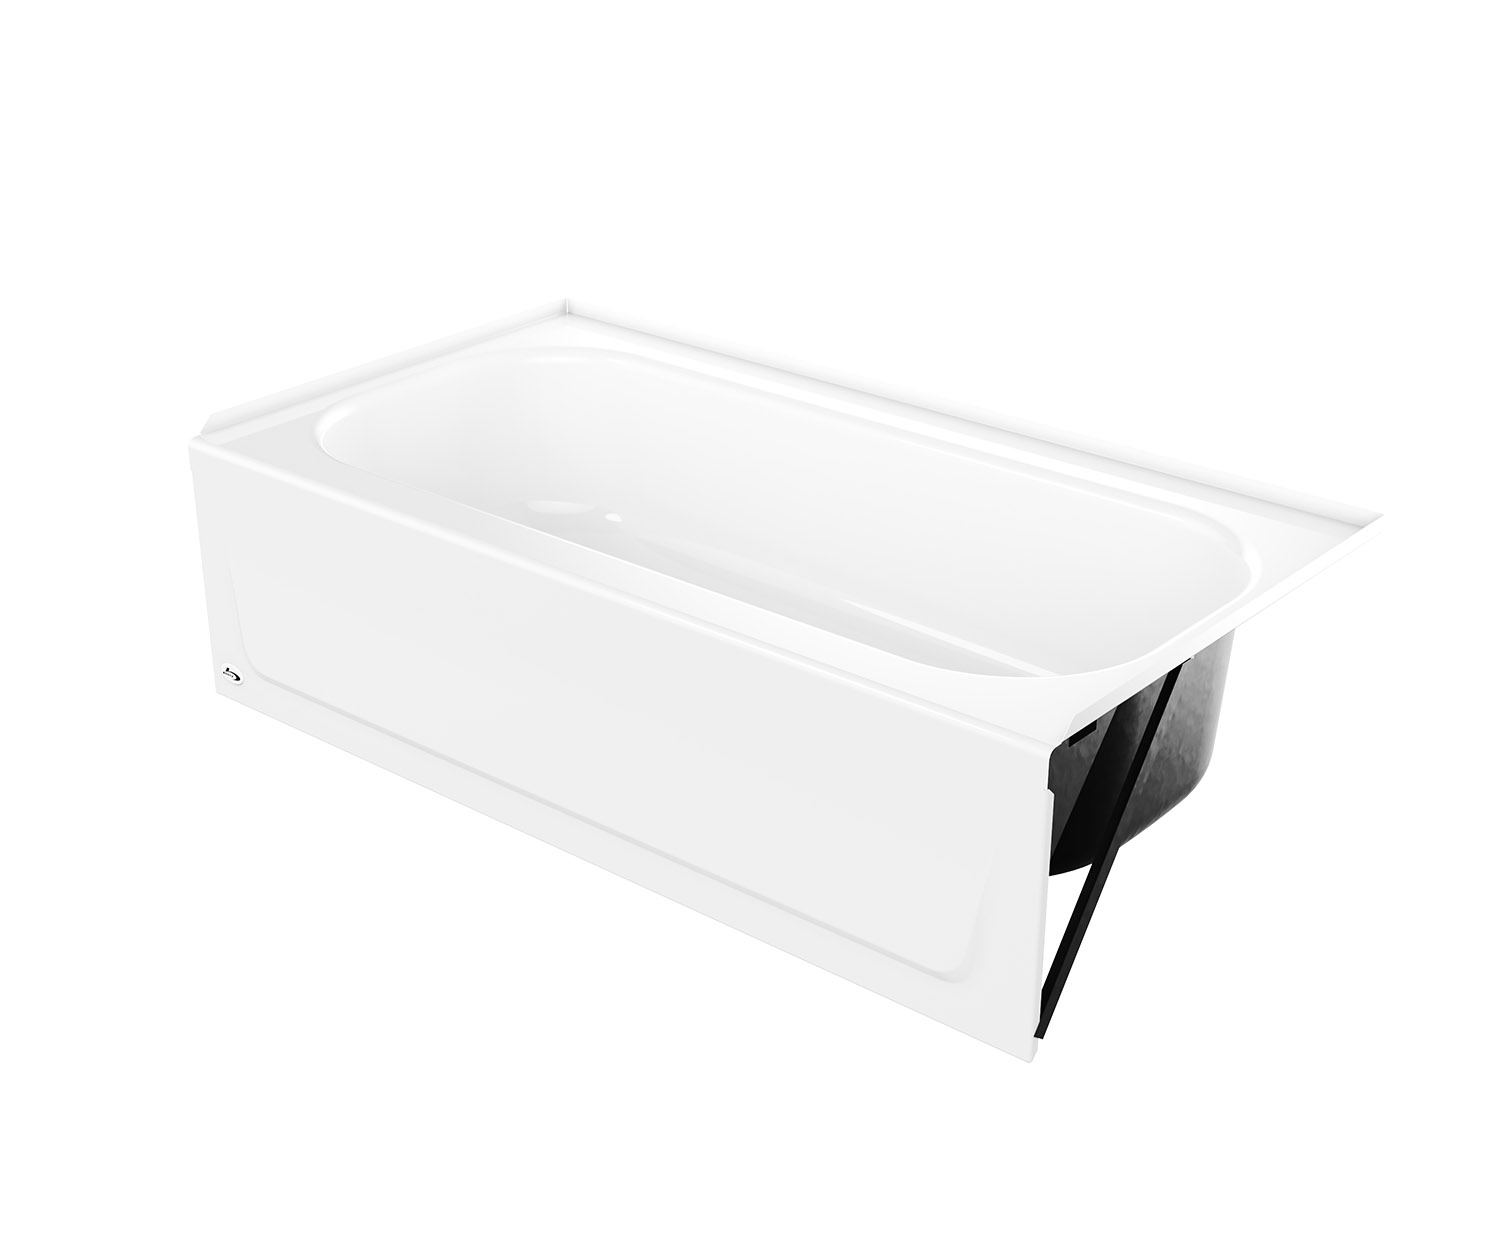 https://res.cloudinary.com/american-bath-group/image/upload/websites-product-info-and-content/bootz/product-info/bathtubs/bz011021/images/bootz-011021-000-00-r.jpg